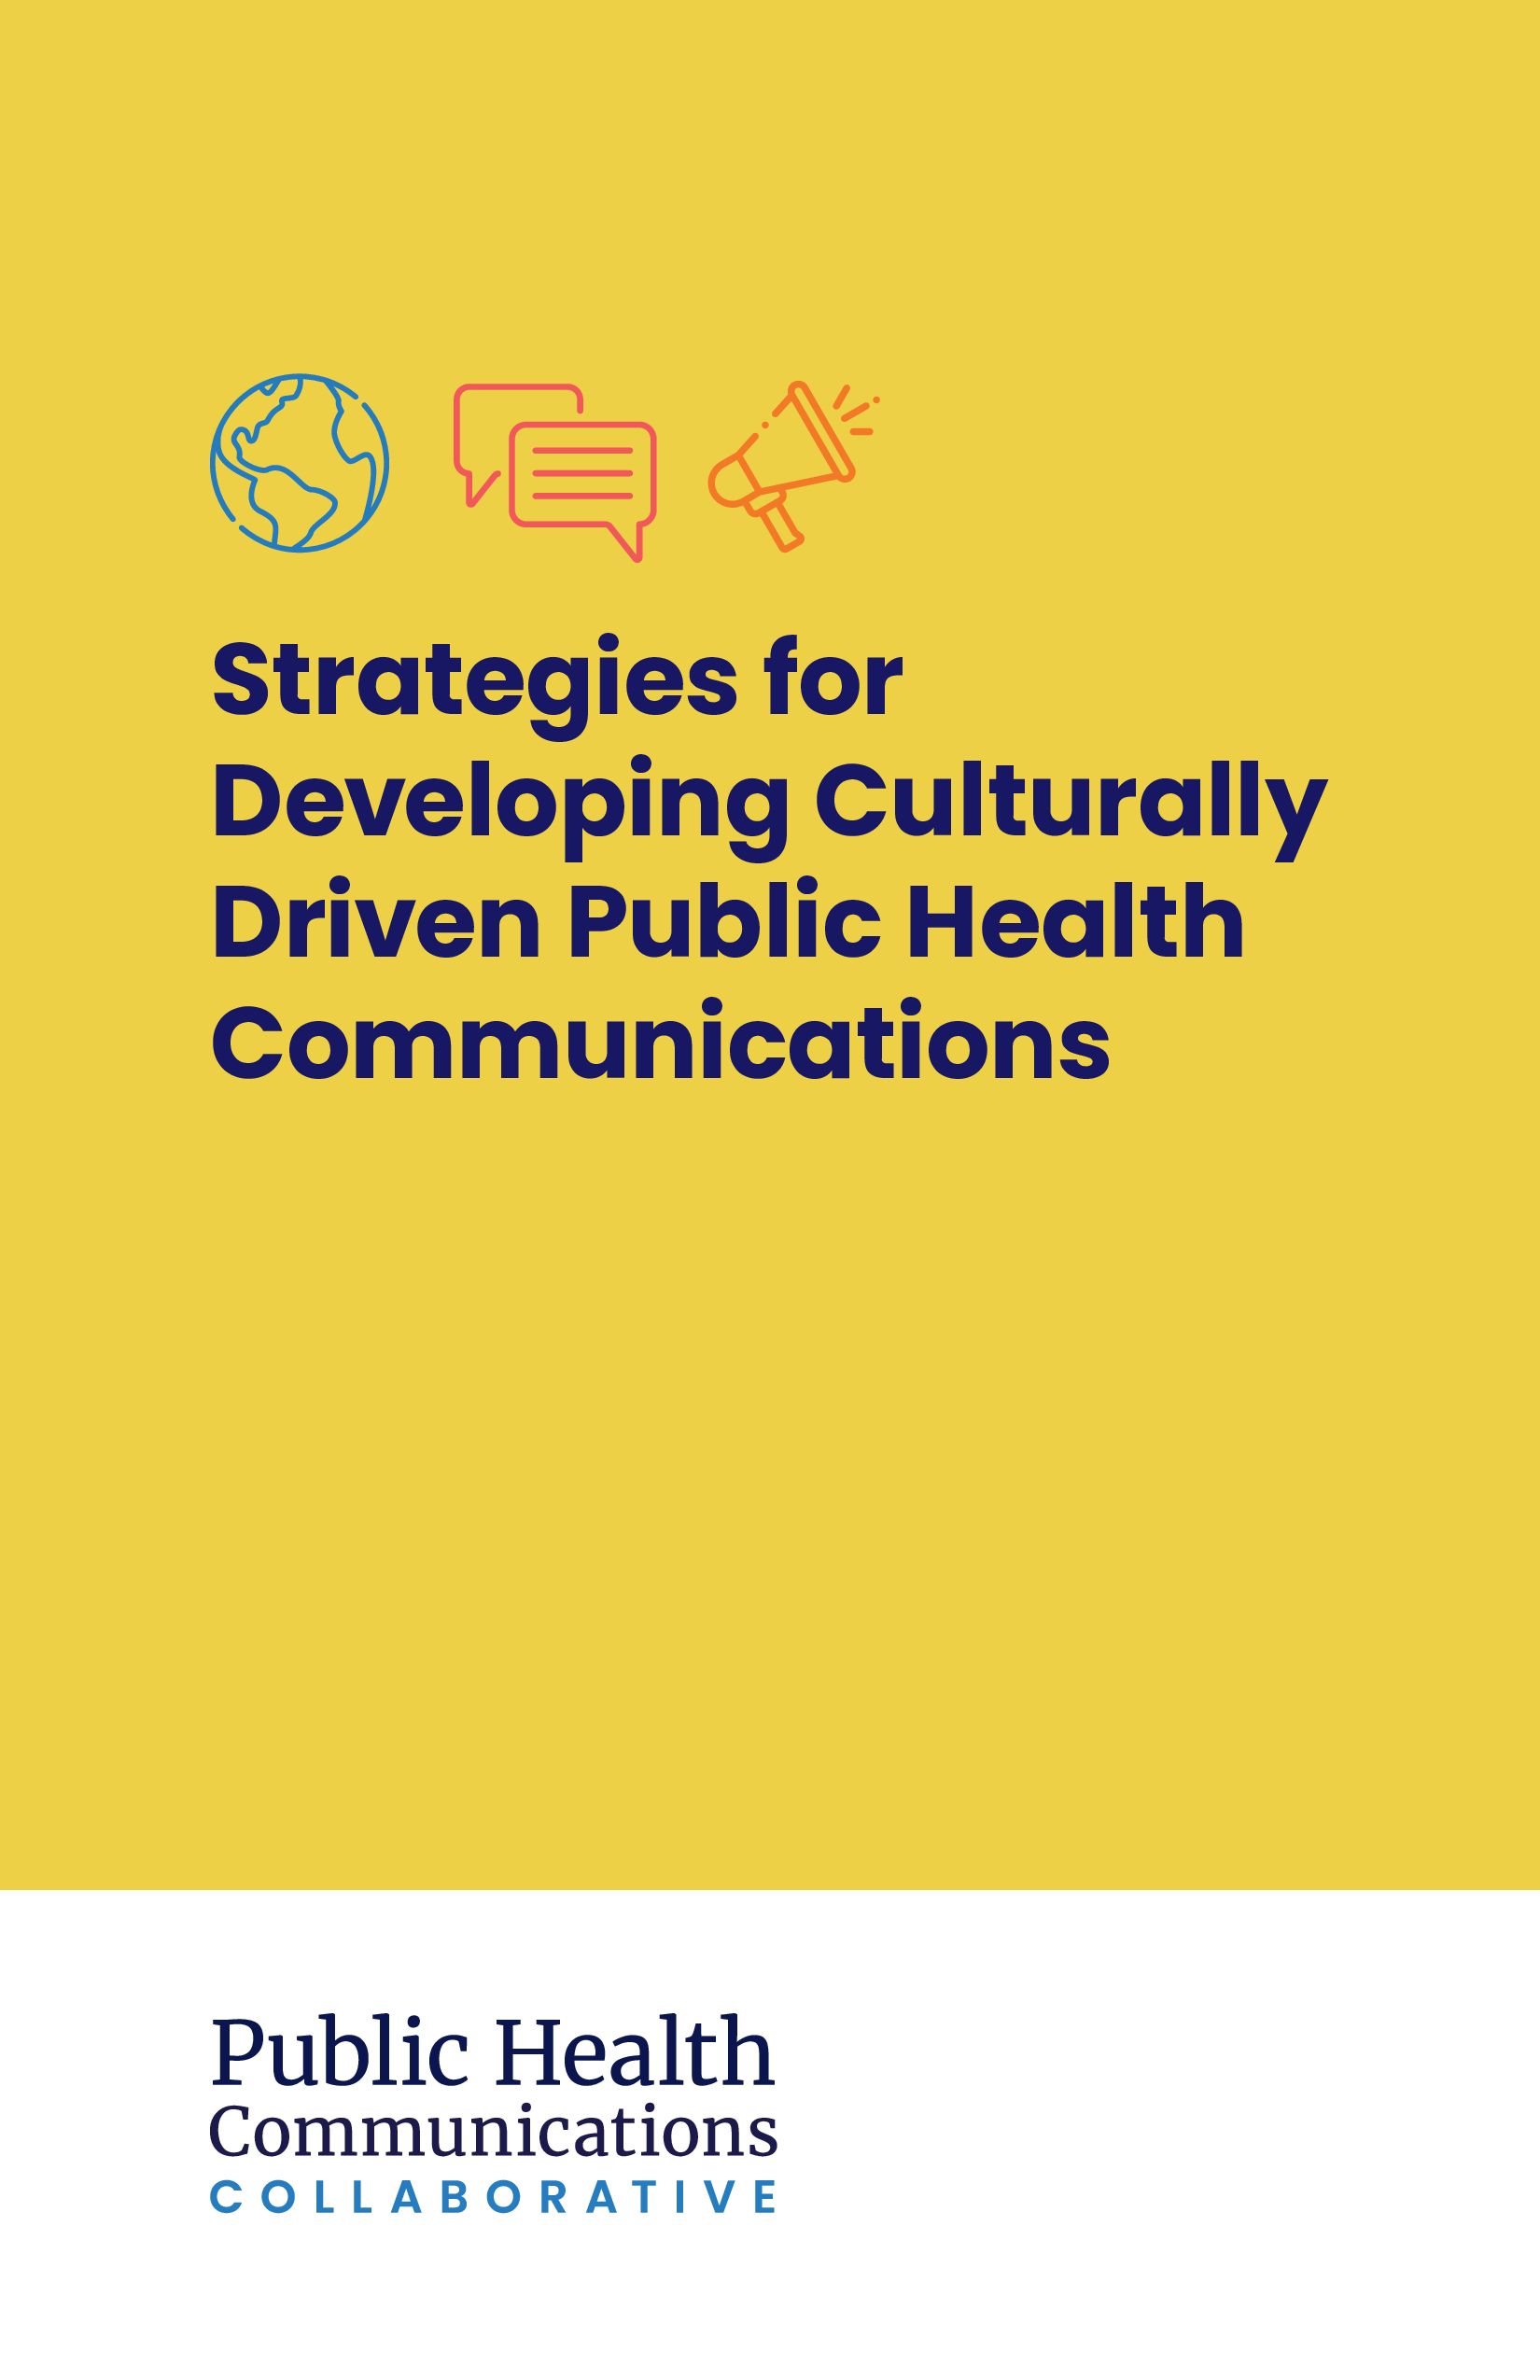 Cover page of toolkit reads 'Strategies for Developing Culturally Driven Public Health Communications.'